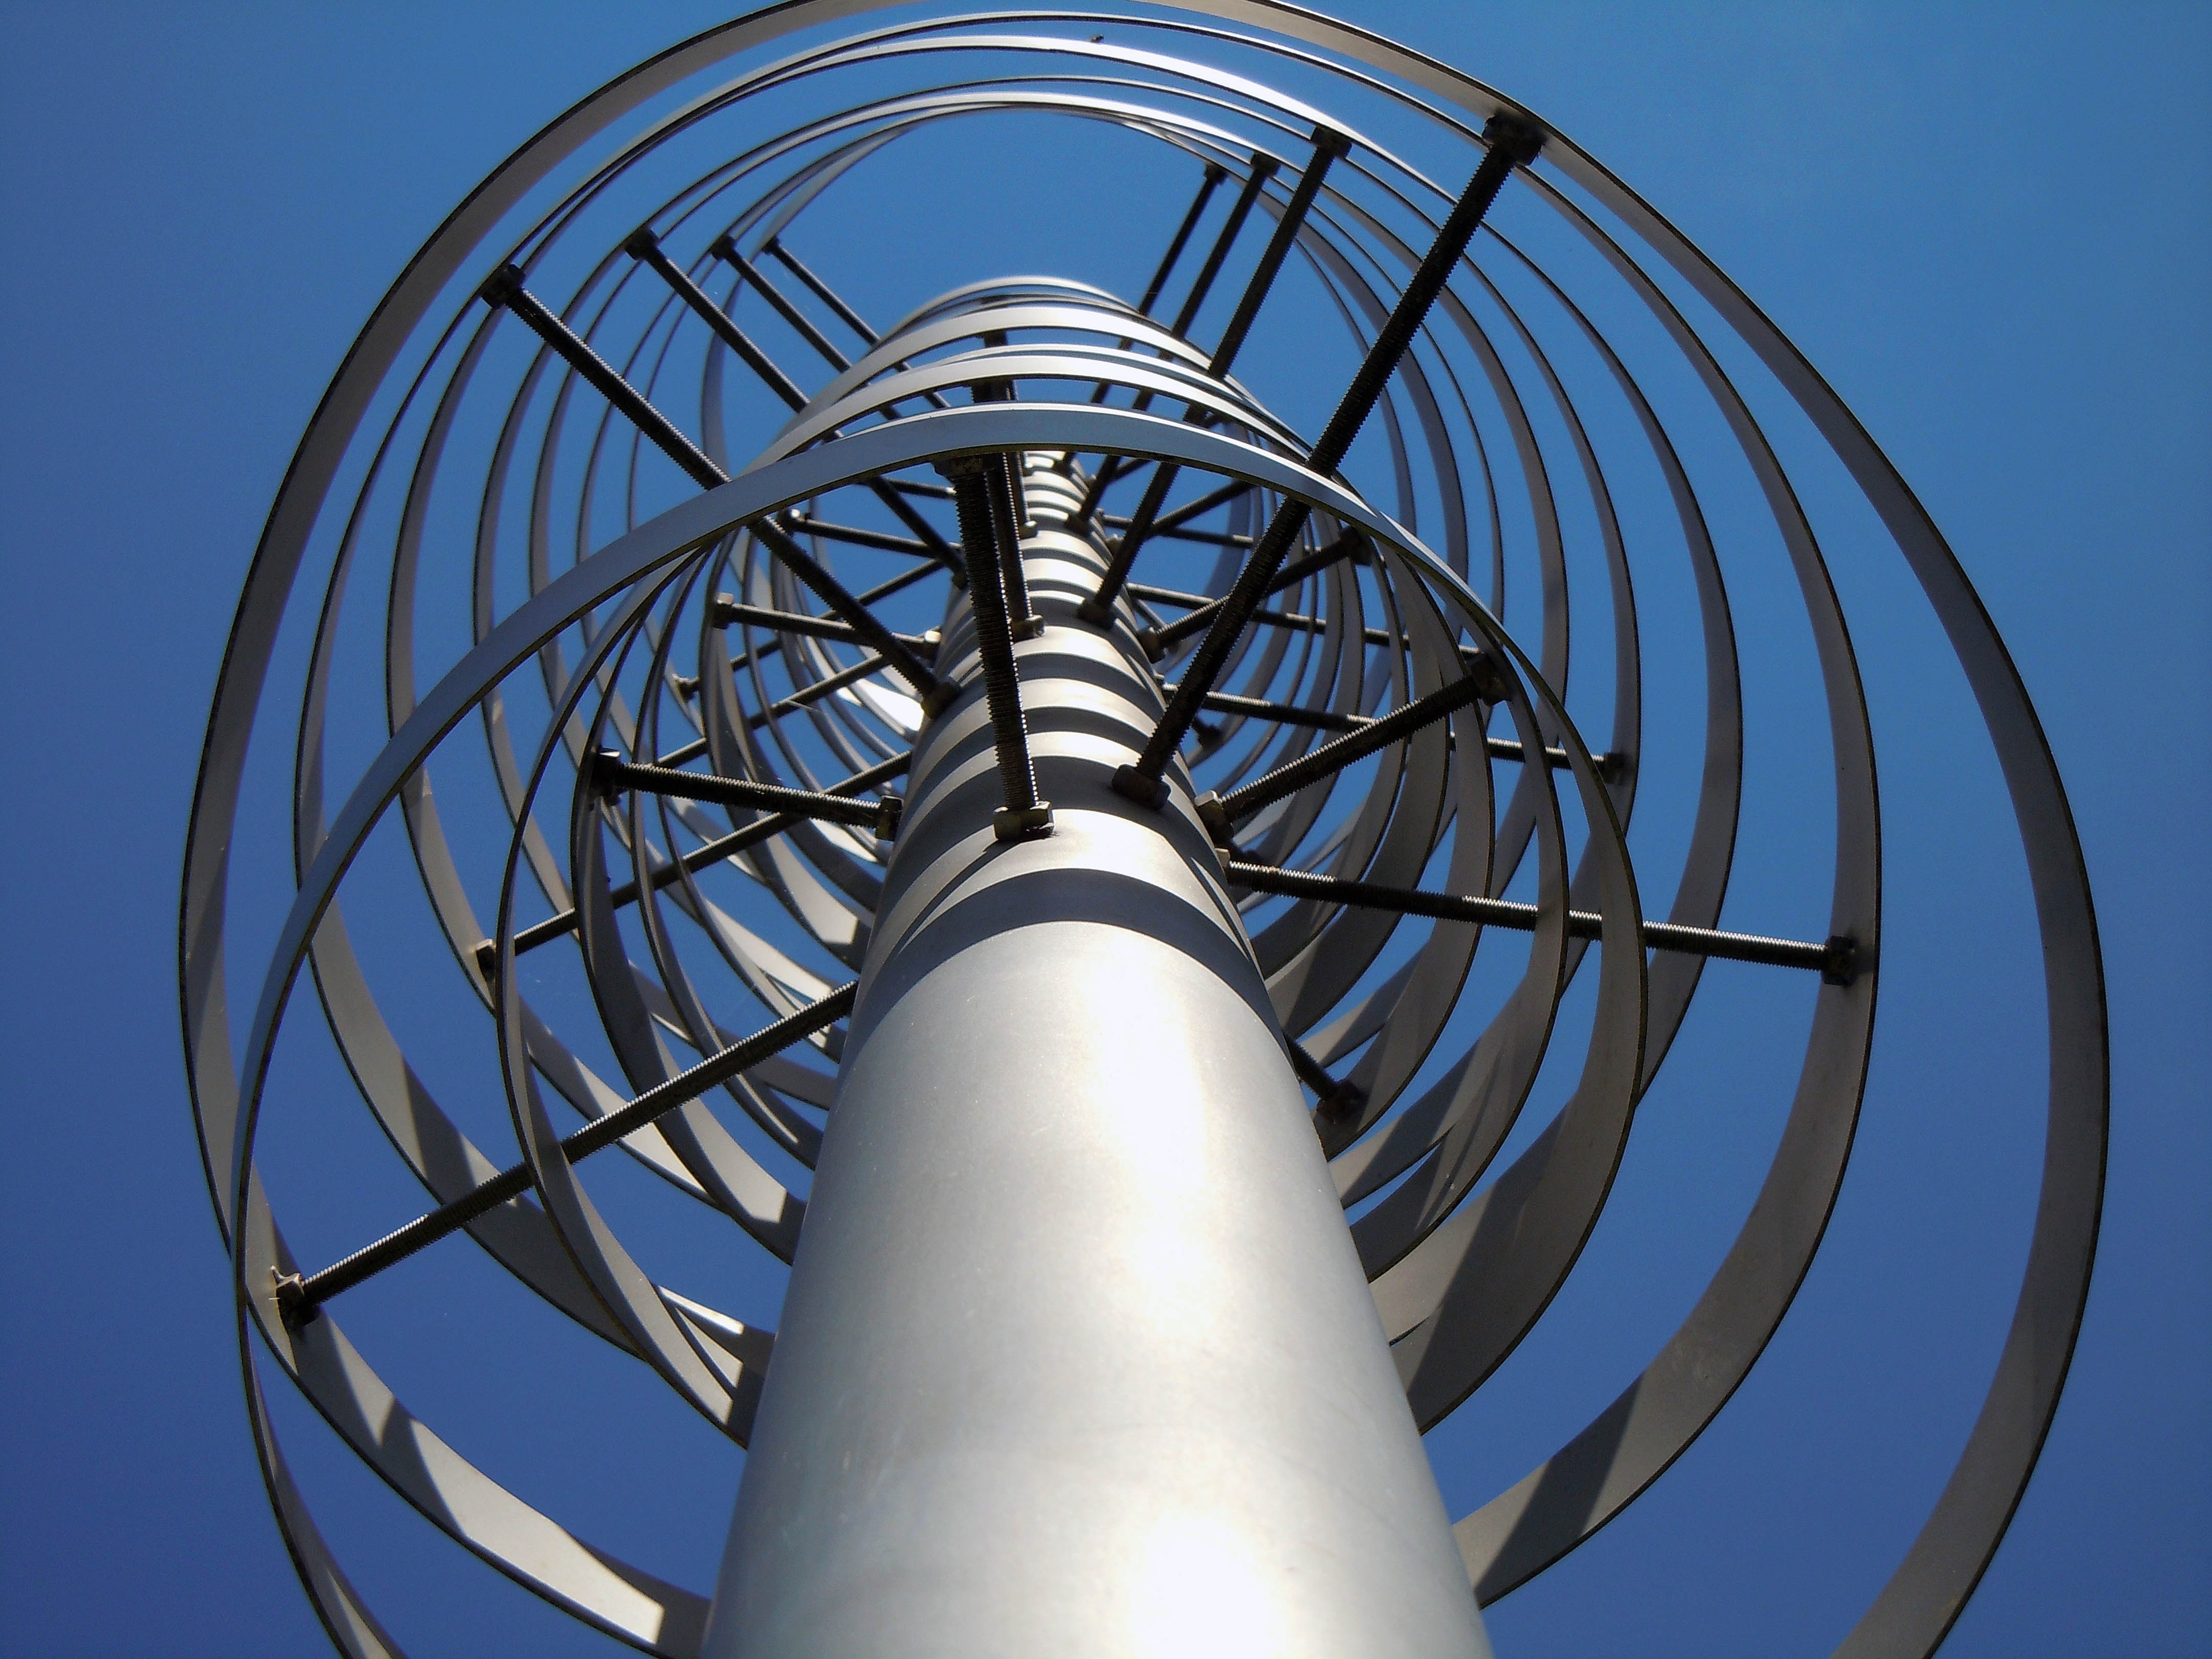 Metal, Sculpture, Spiral, industry, low angle view